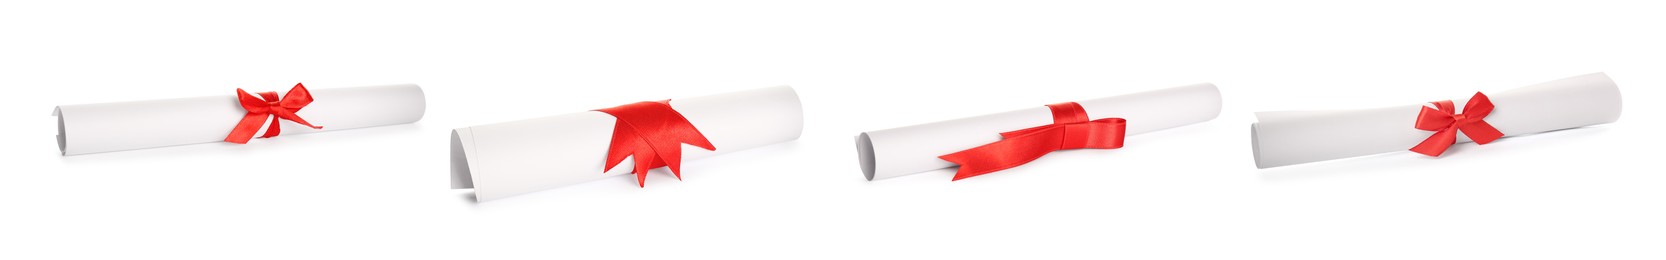 Rolled student's diplomas with red ribbons on white background, collage. Banner design